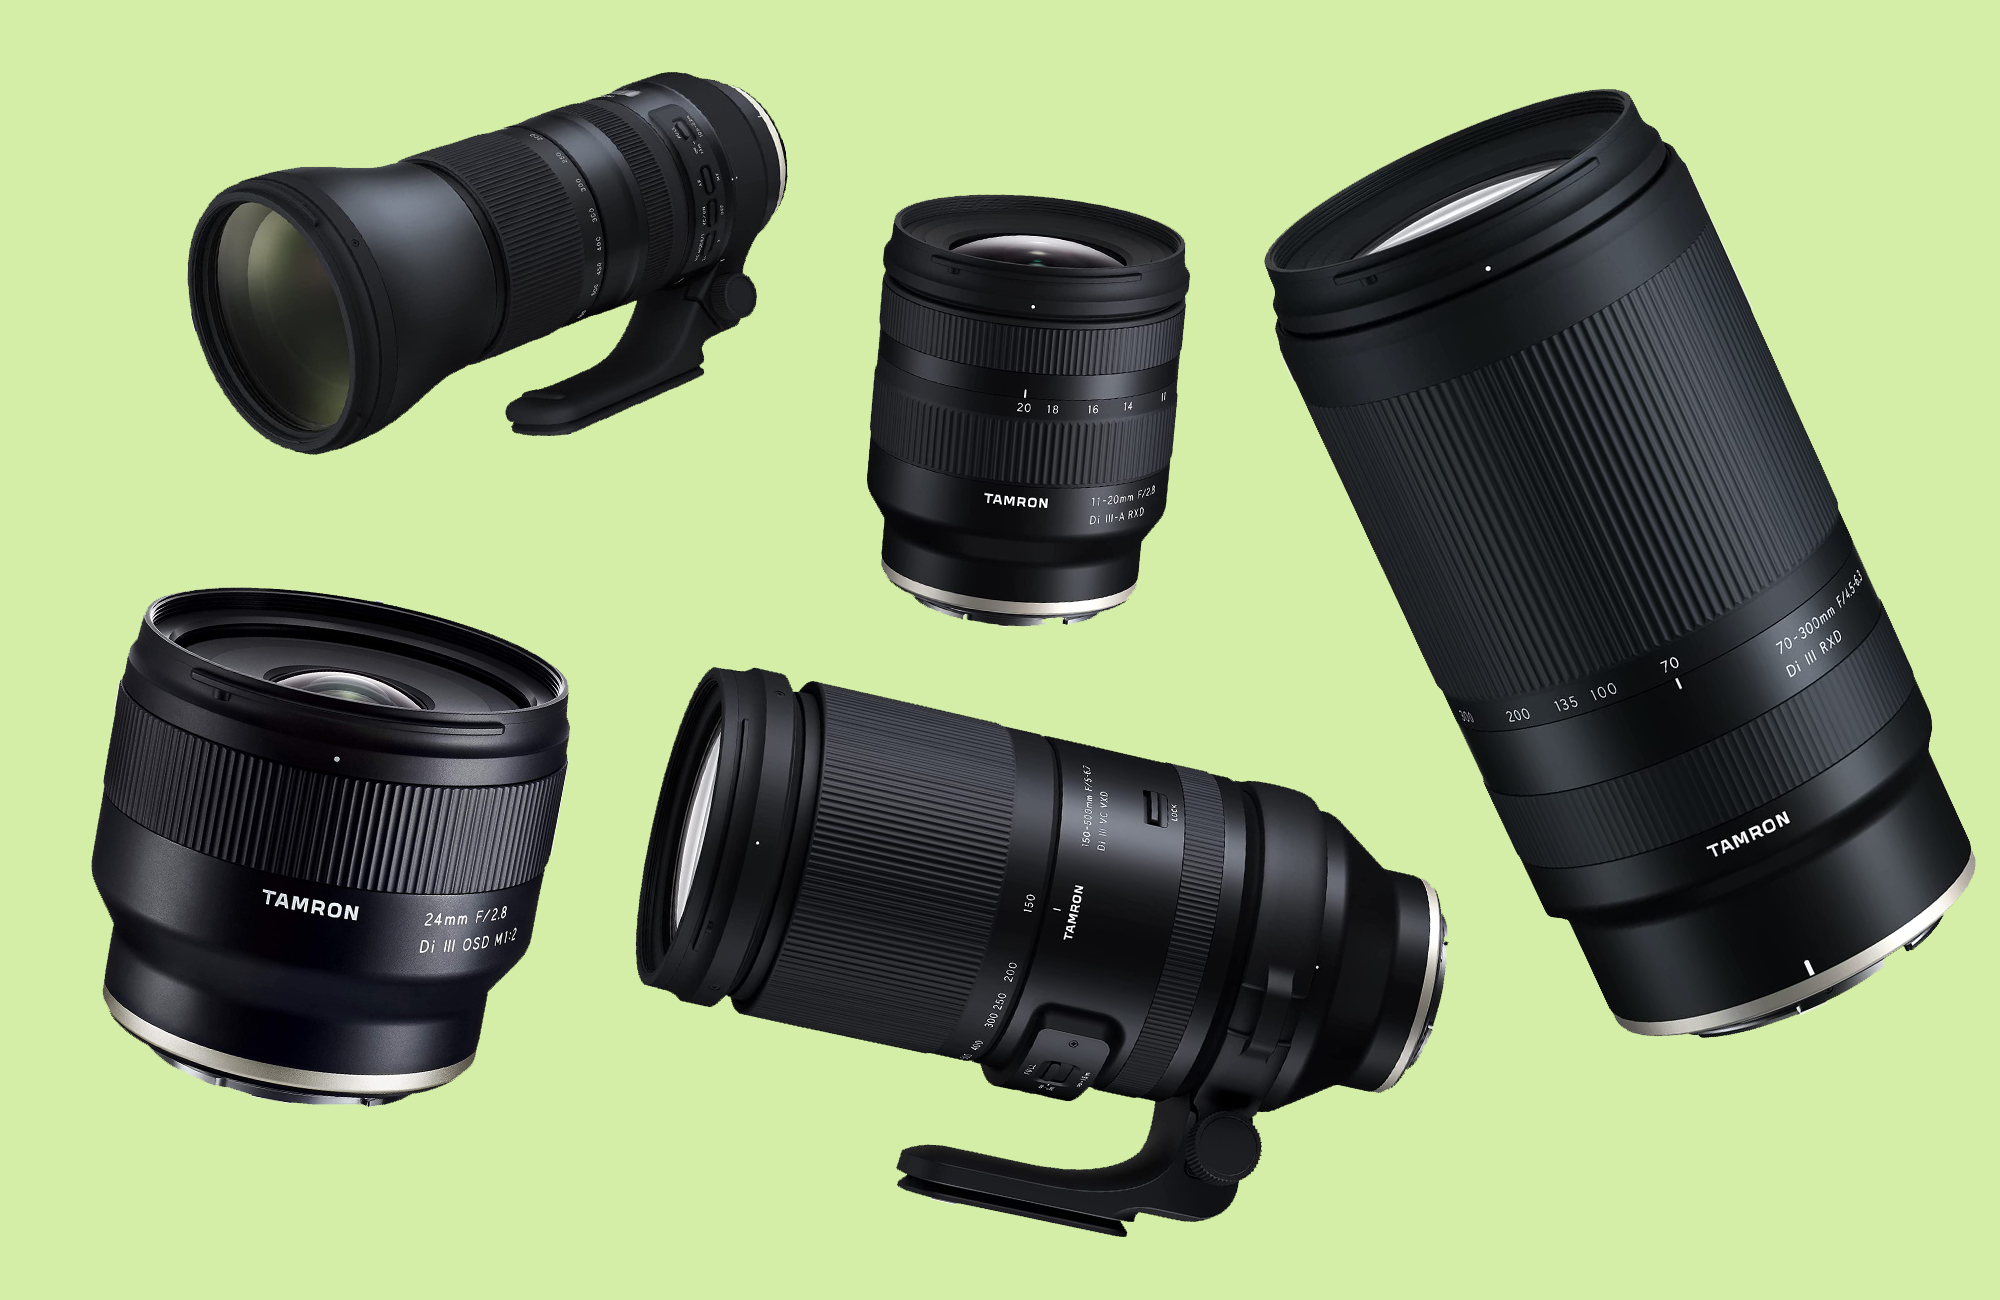 Save up to $200 on a ton of Tamron lenses at Amazon right now